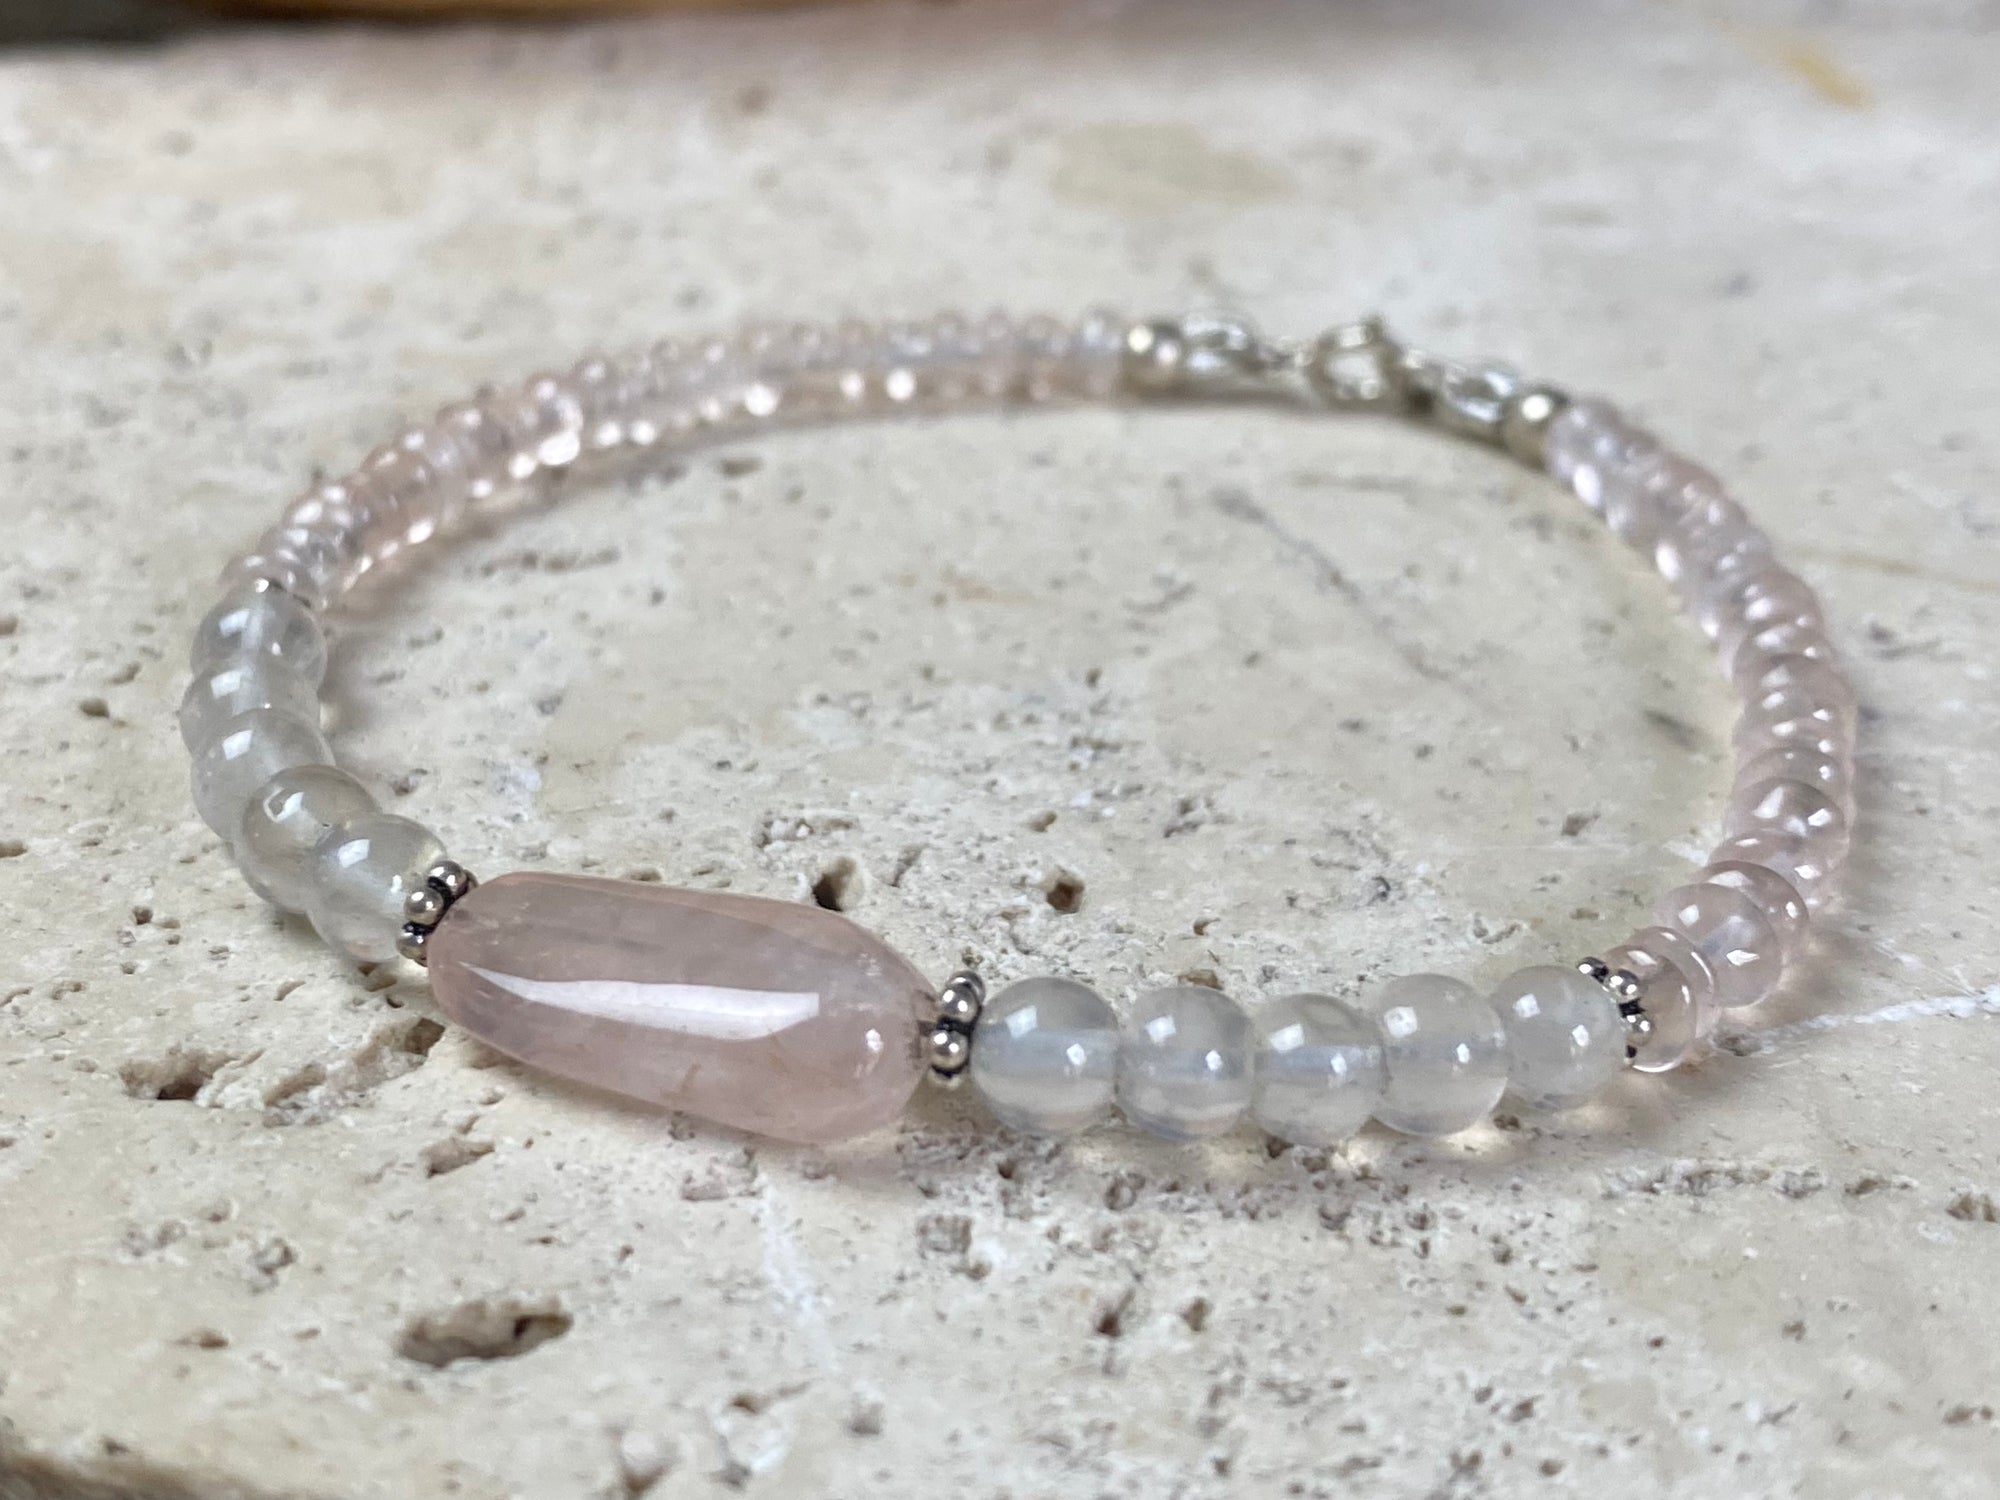 A simple bracelet made from rose quartz, finished with sterling silver detailing and clasp.  Measurements: 19 cm length, centre rose quarrz stone 2 cm length